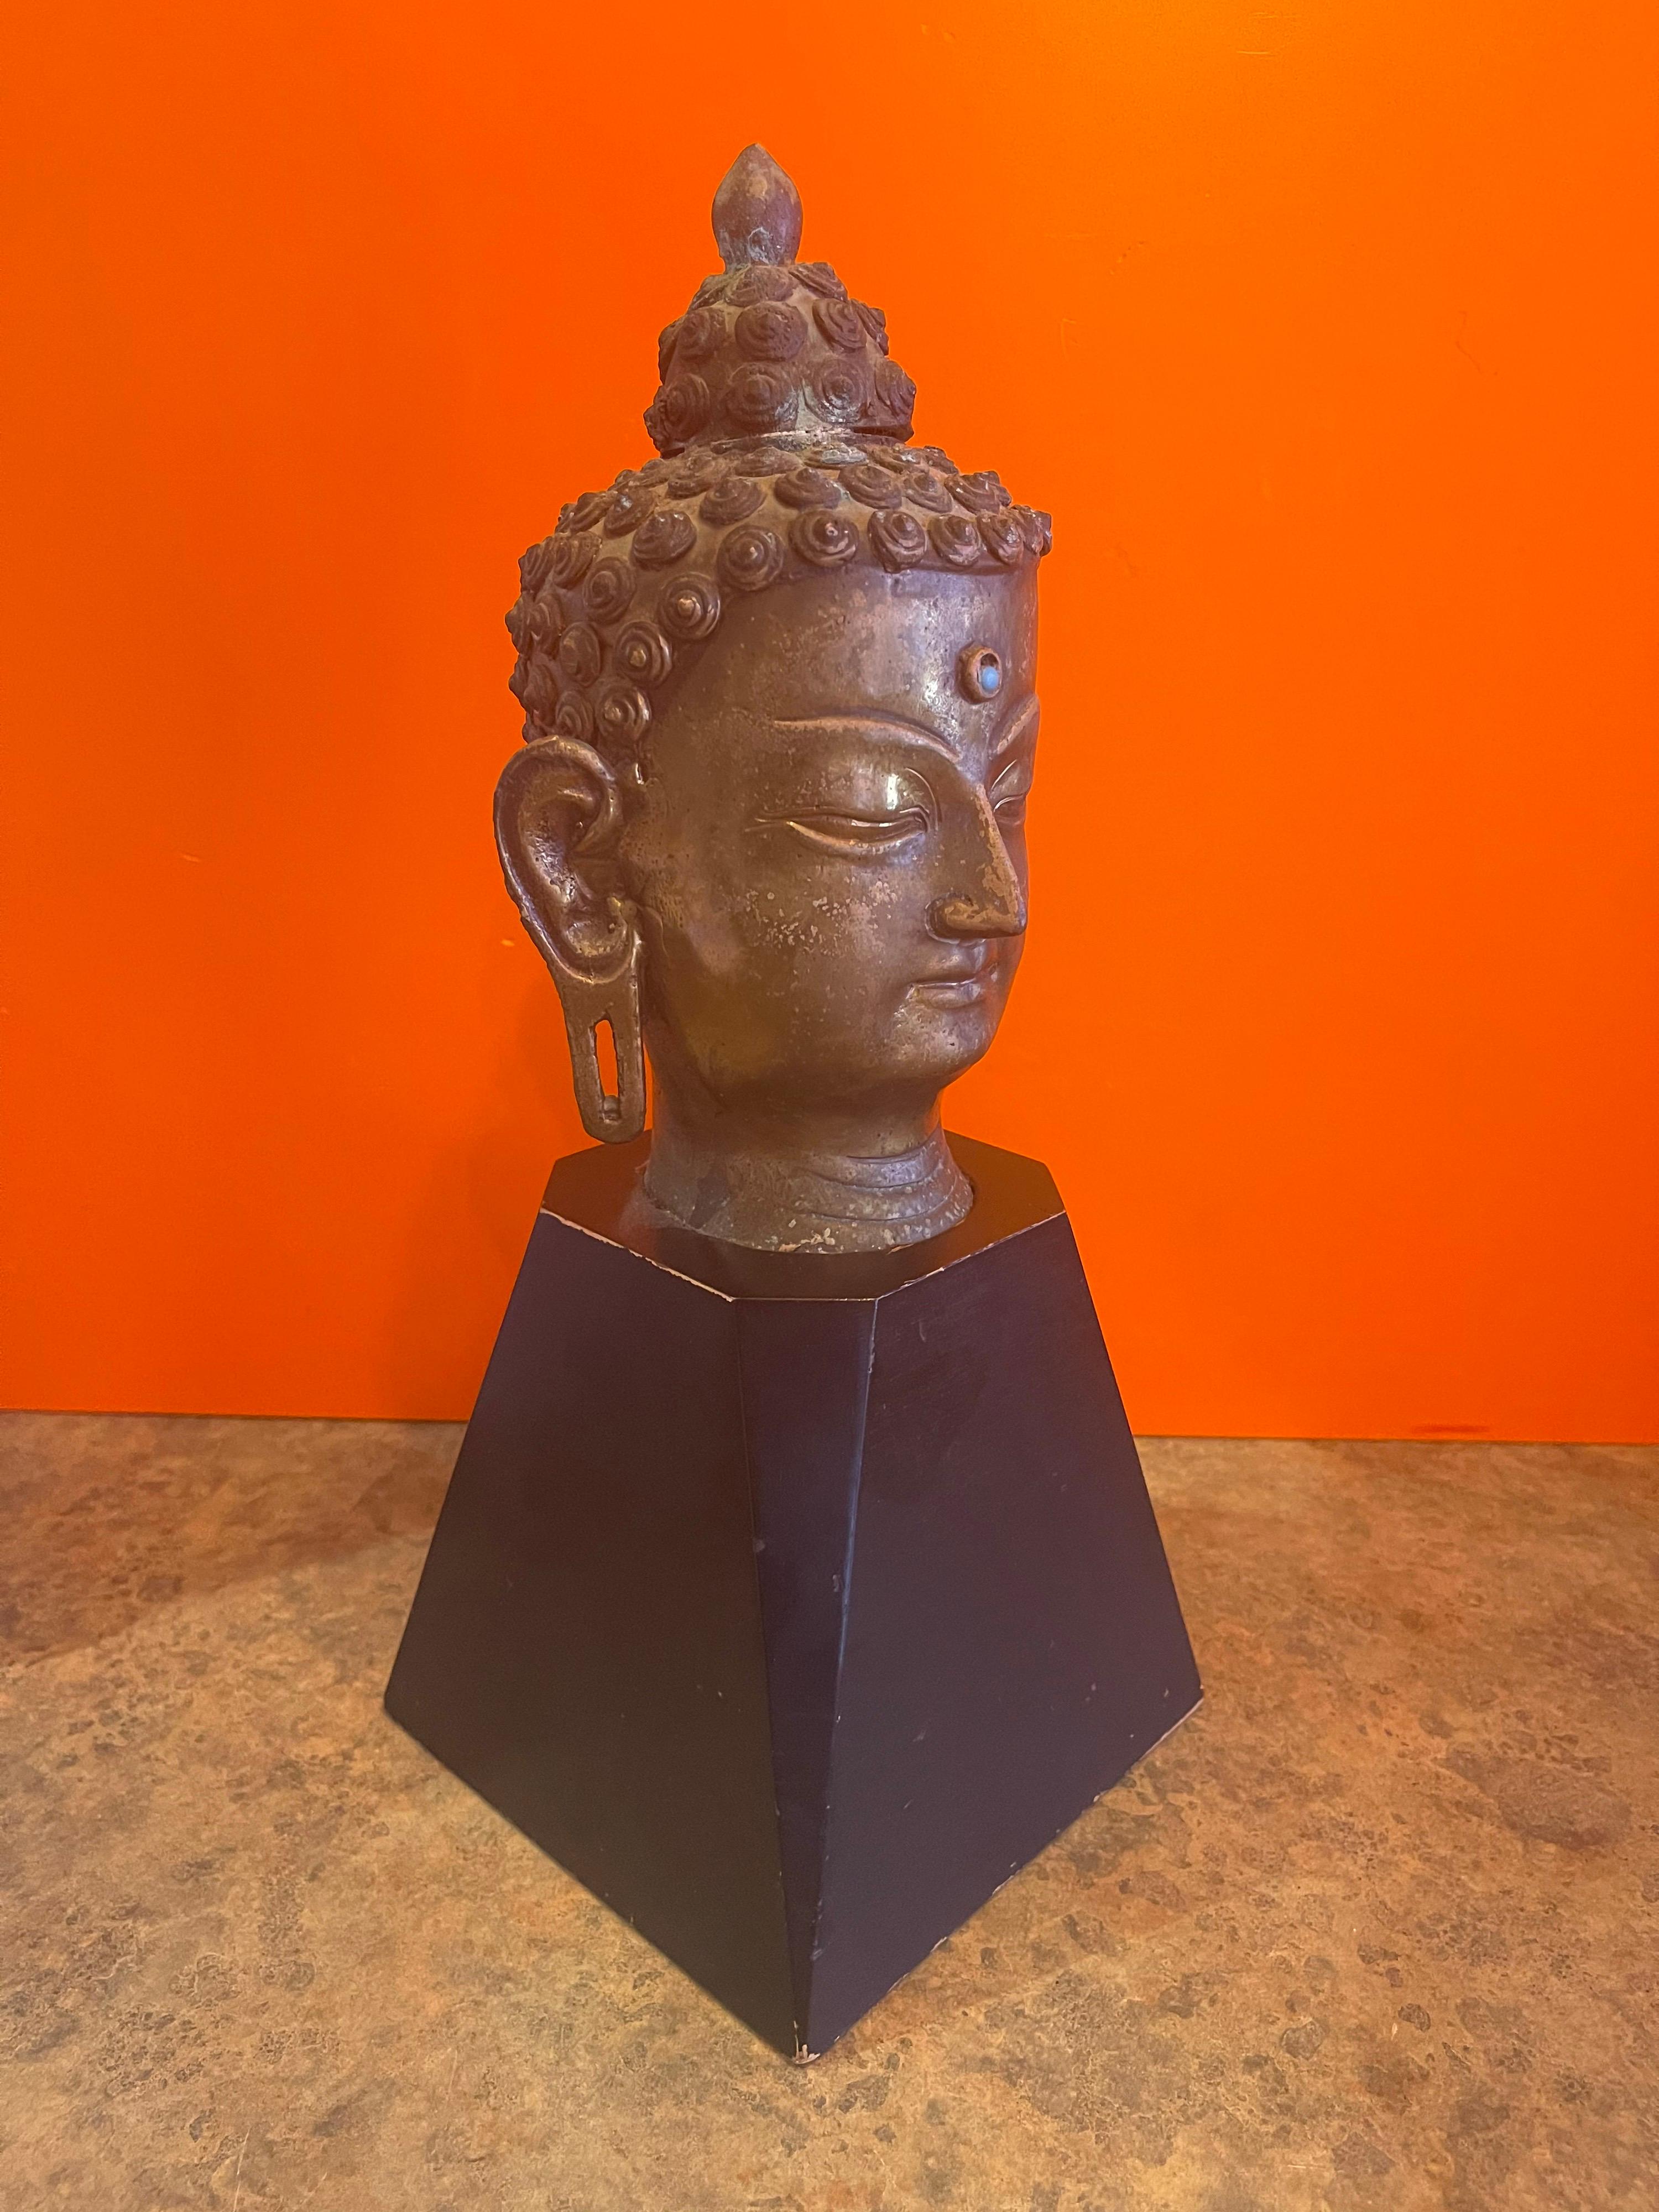 Decorative bronze Buddha headon black wood base, circa 1970s. The piece is in very good vintage condition and measures: 6